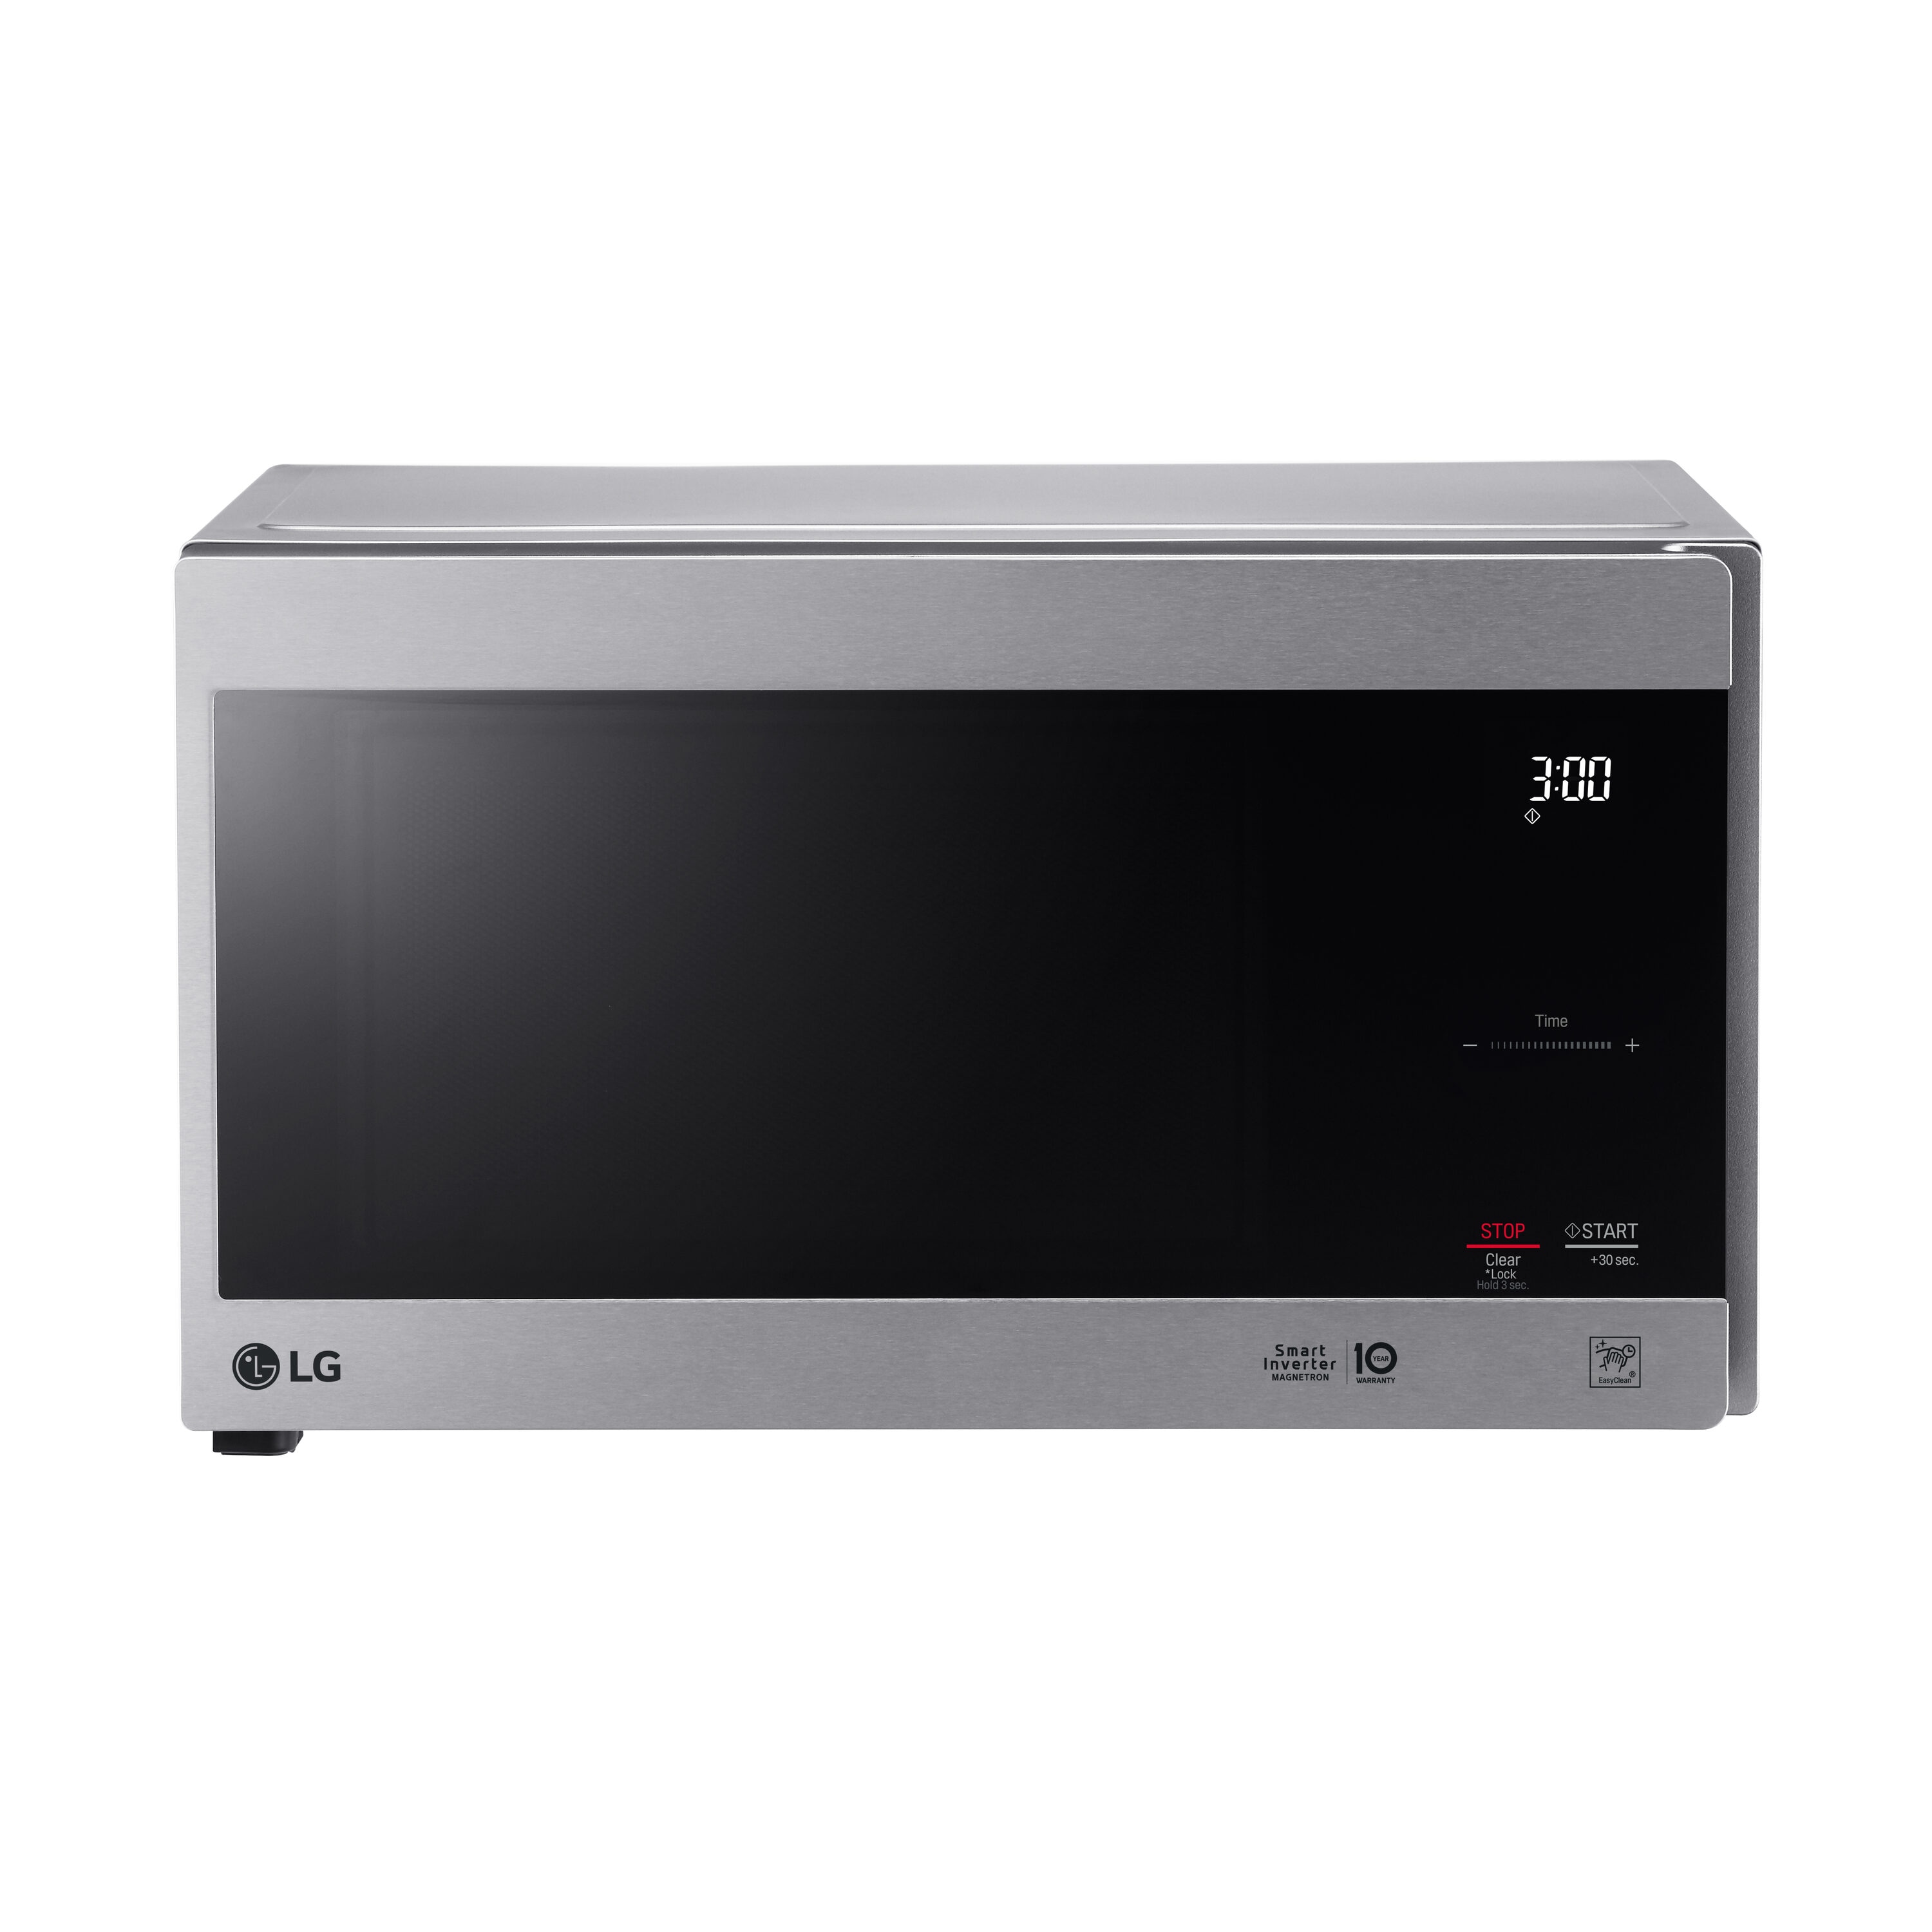  0.9 Cu. Ft. Stainless Steel Countertop Microwave Oven